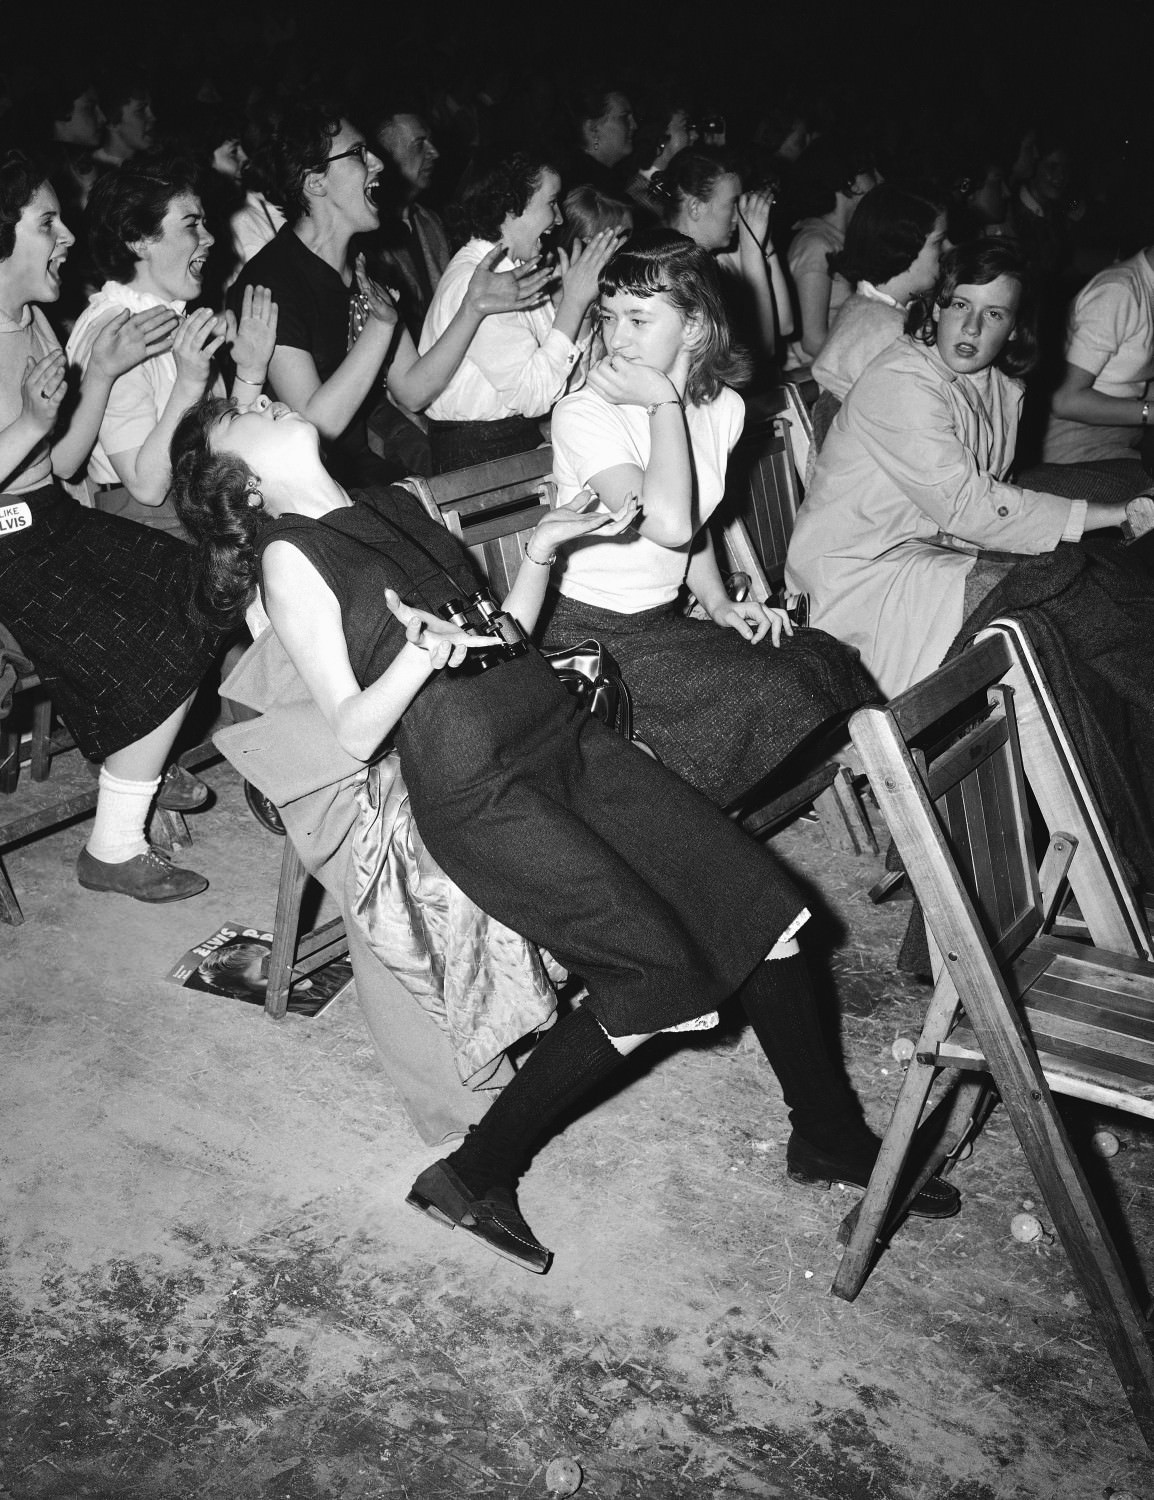 Young ladies lose their mind when Elvis Presley takes the stage in Philadelphia, US in 1957.